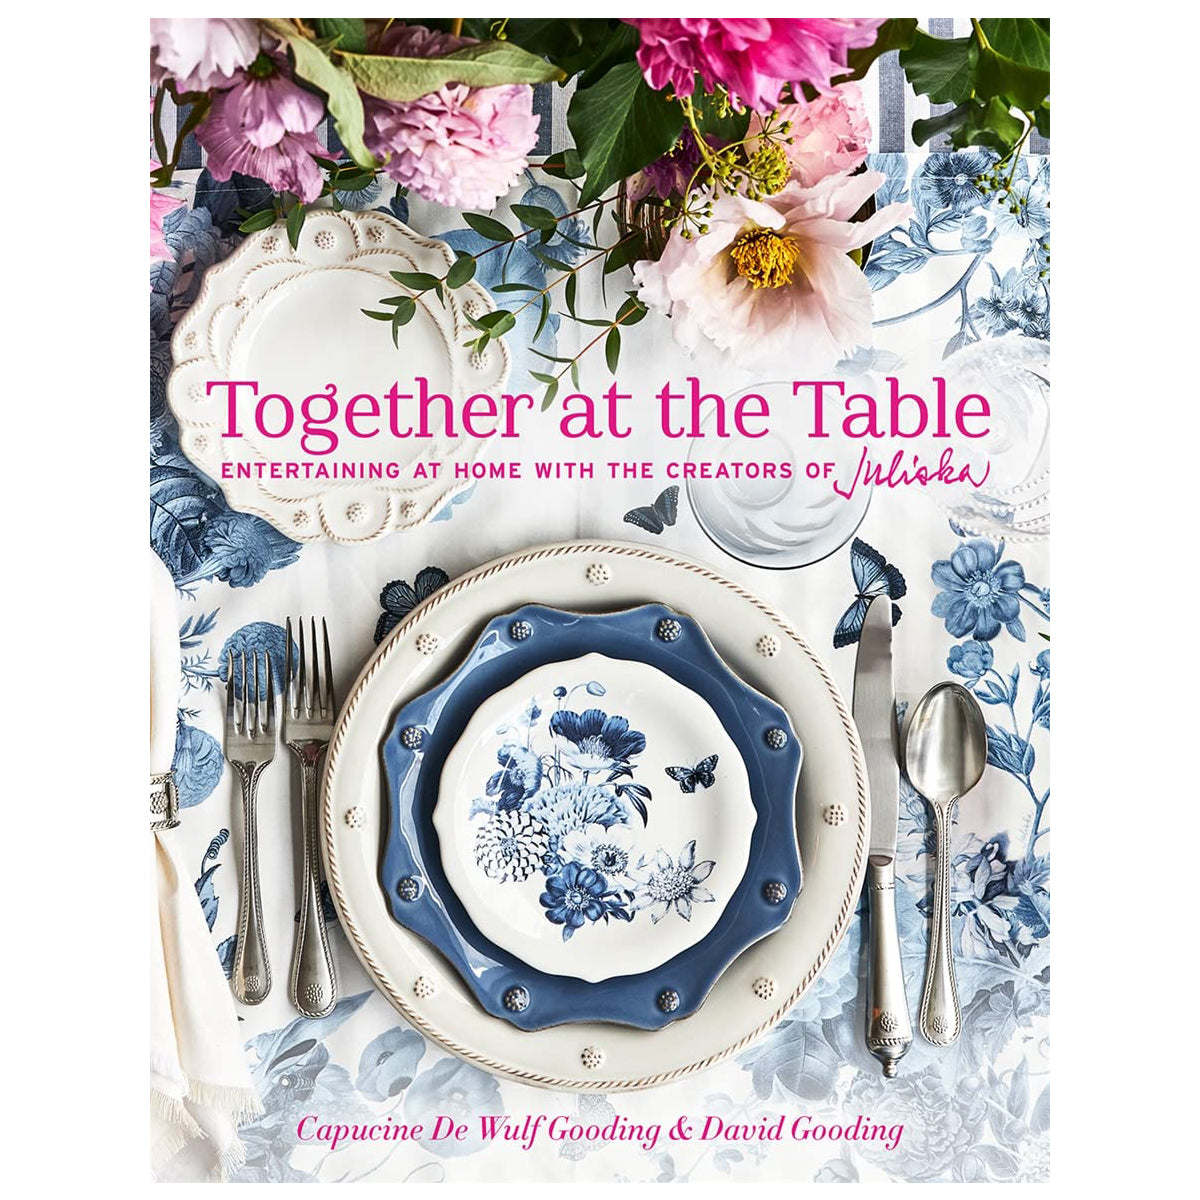 Together at the Table: Entertaining at Home with the Creators of Juliska